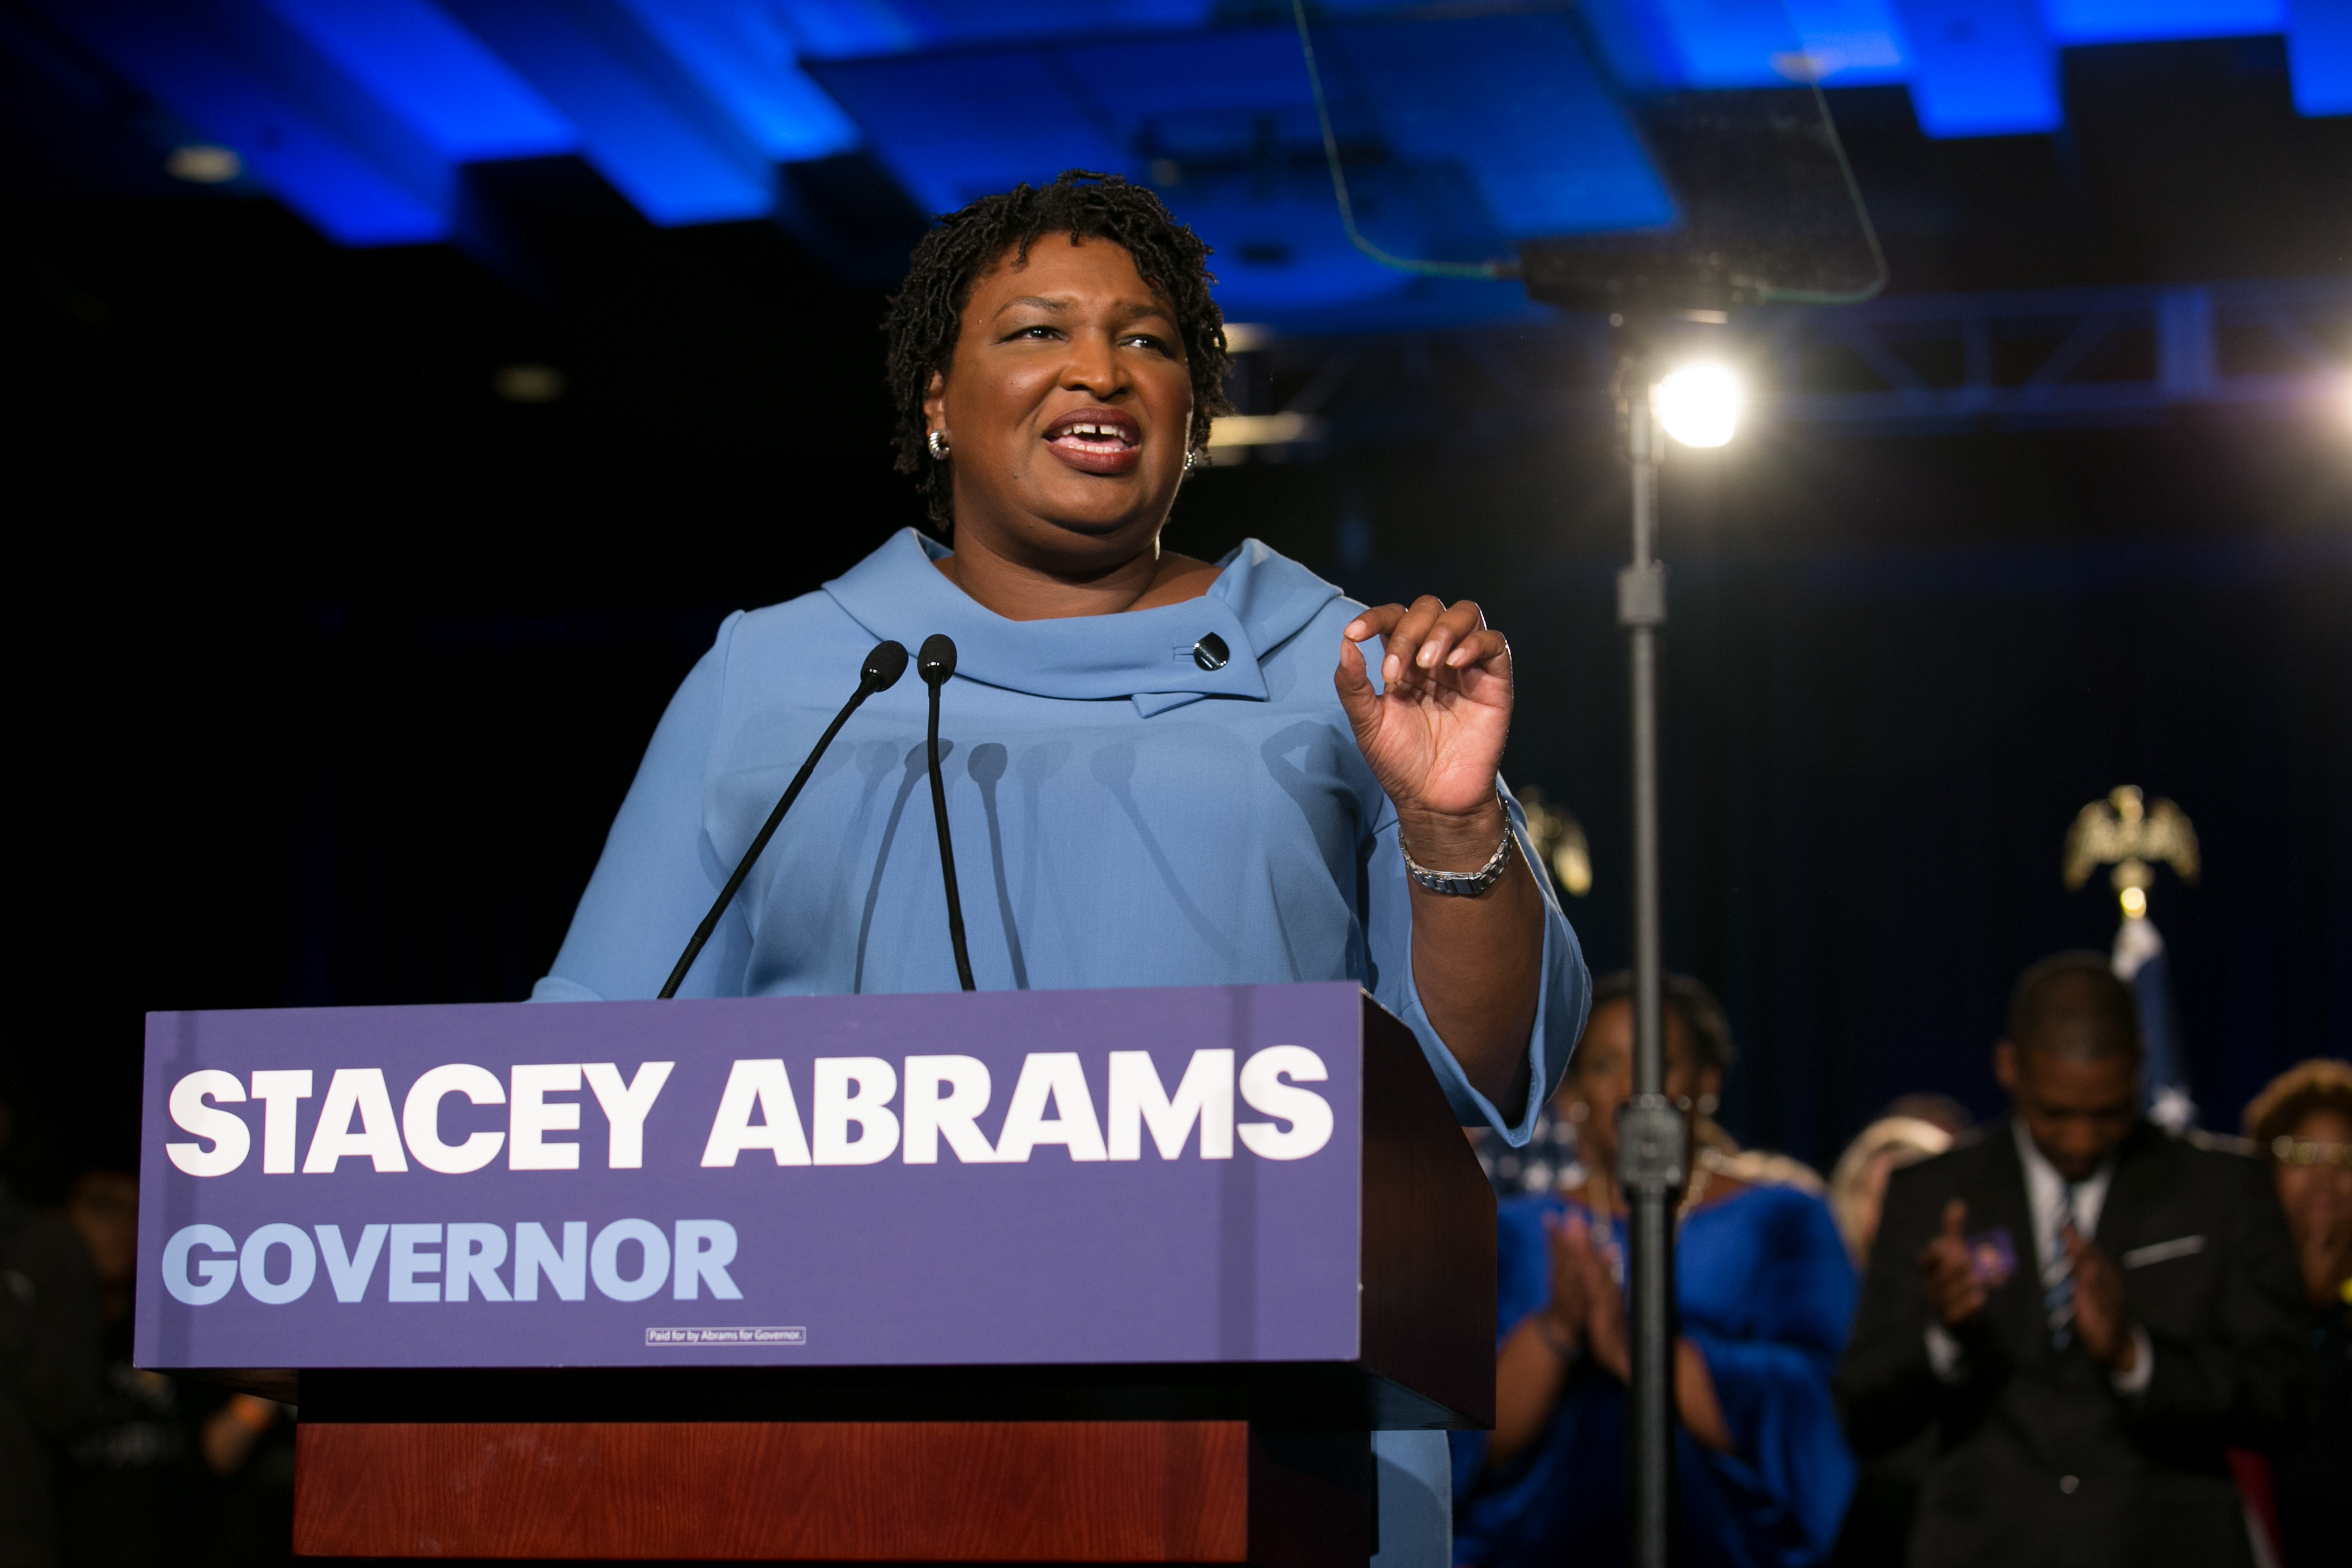 ]Democratic Gubernatorial candidate Stacey Abrams addresses supporters at an election watch party on November 6, 2018 in Atlanta, Georgia. (Photo by Jessica McGowan/Getty Images)